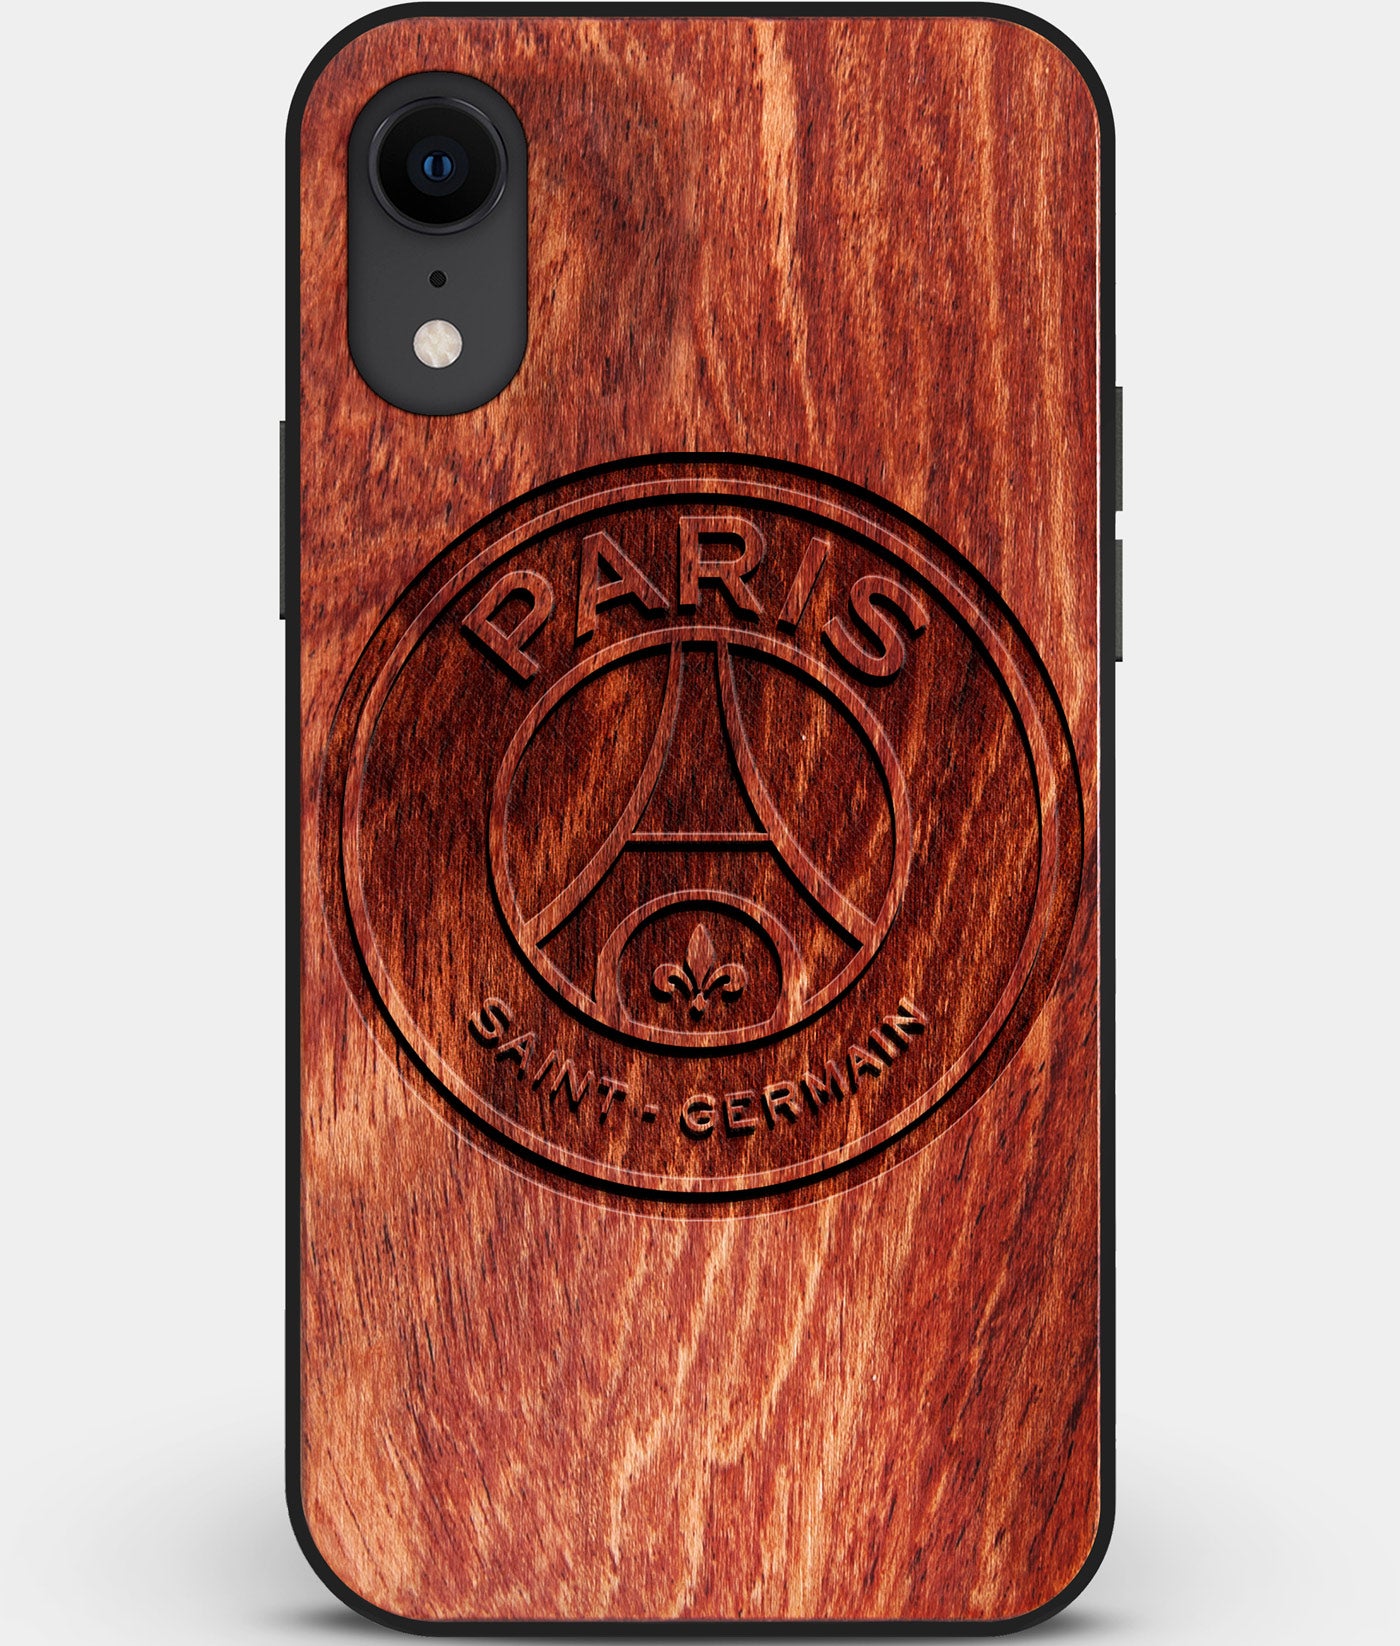 Custom Carved Wood Paris Saint Germain F.C. iPhone XR Case | Personalized Mahogany Wood Paris Saint Germain F.C. Cover, Birthday Gift, Gifts For Him, Monogrammed Gift For Fan | by Engraved In Nature